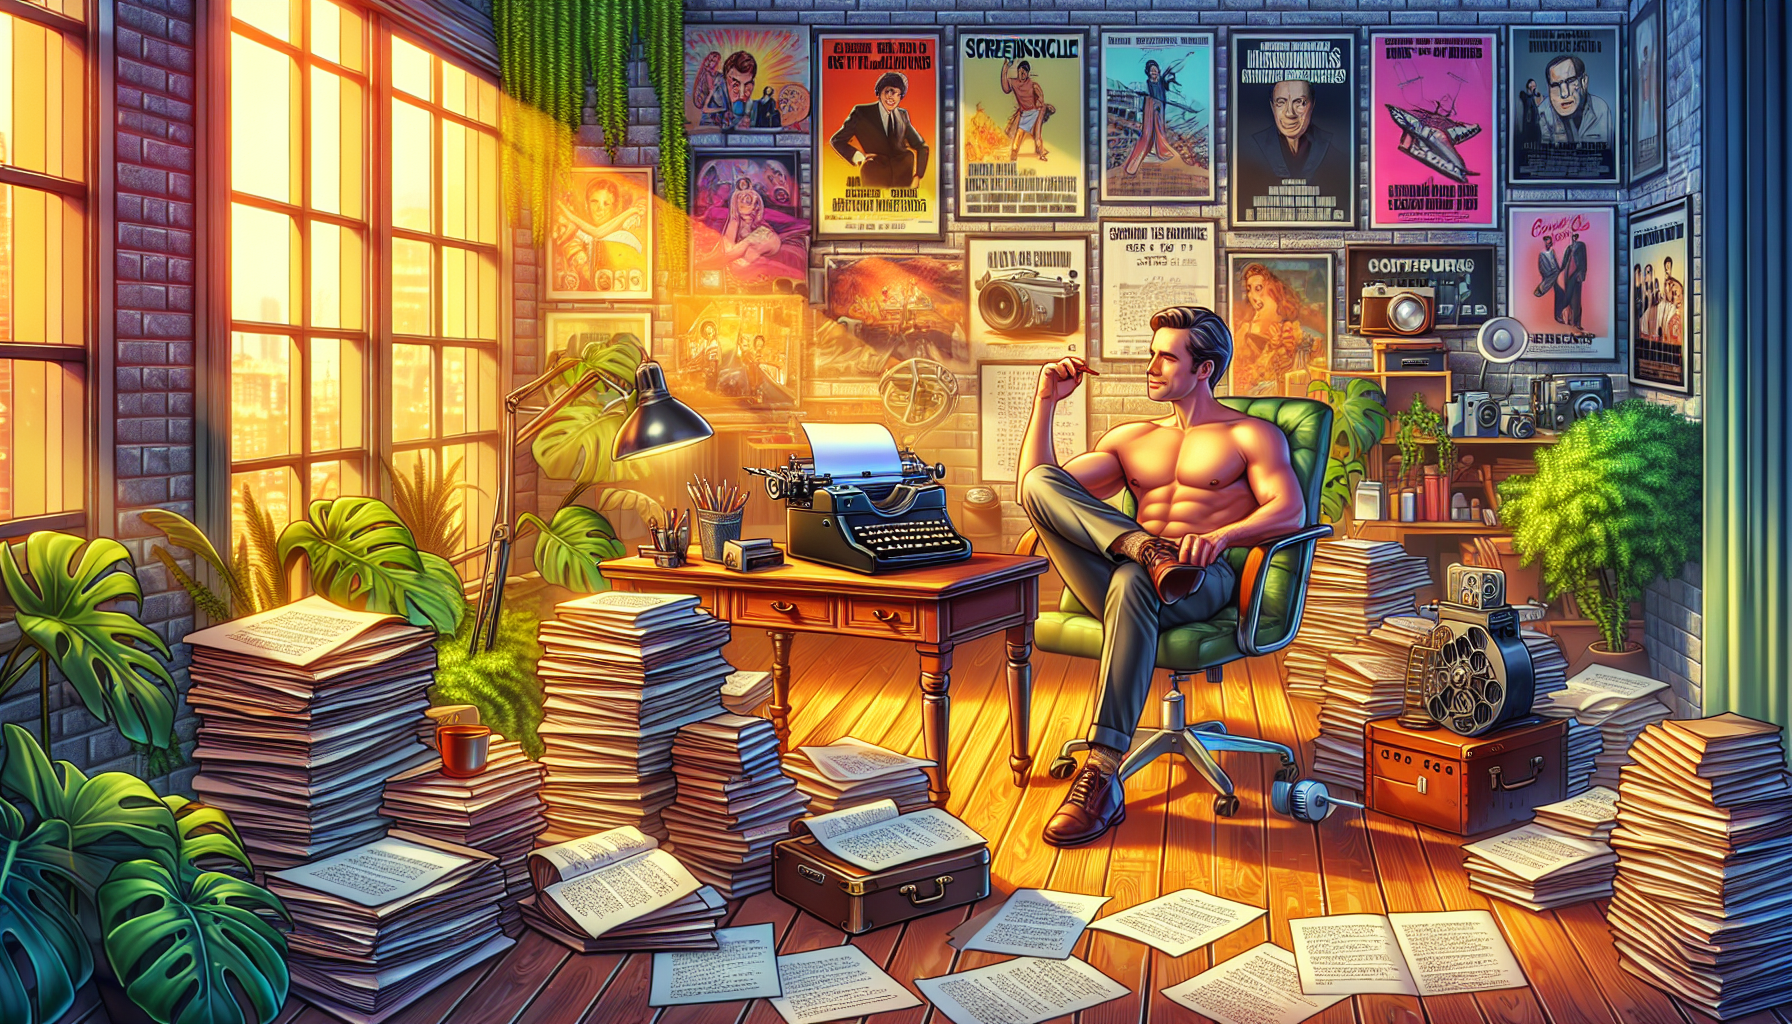 An artistically decorated home office filled with film posters, a vintage typewriter, stacks of screenplay manuscripts, and a relaxed Brian Burns brainstorming his next blockbuster, surrounded by lush